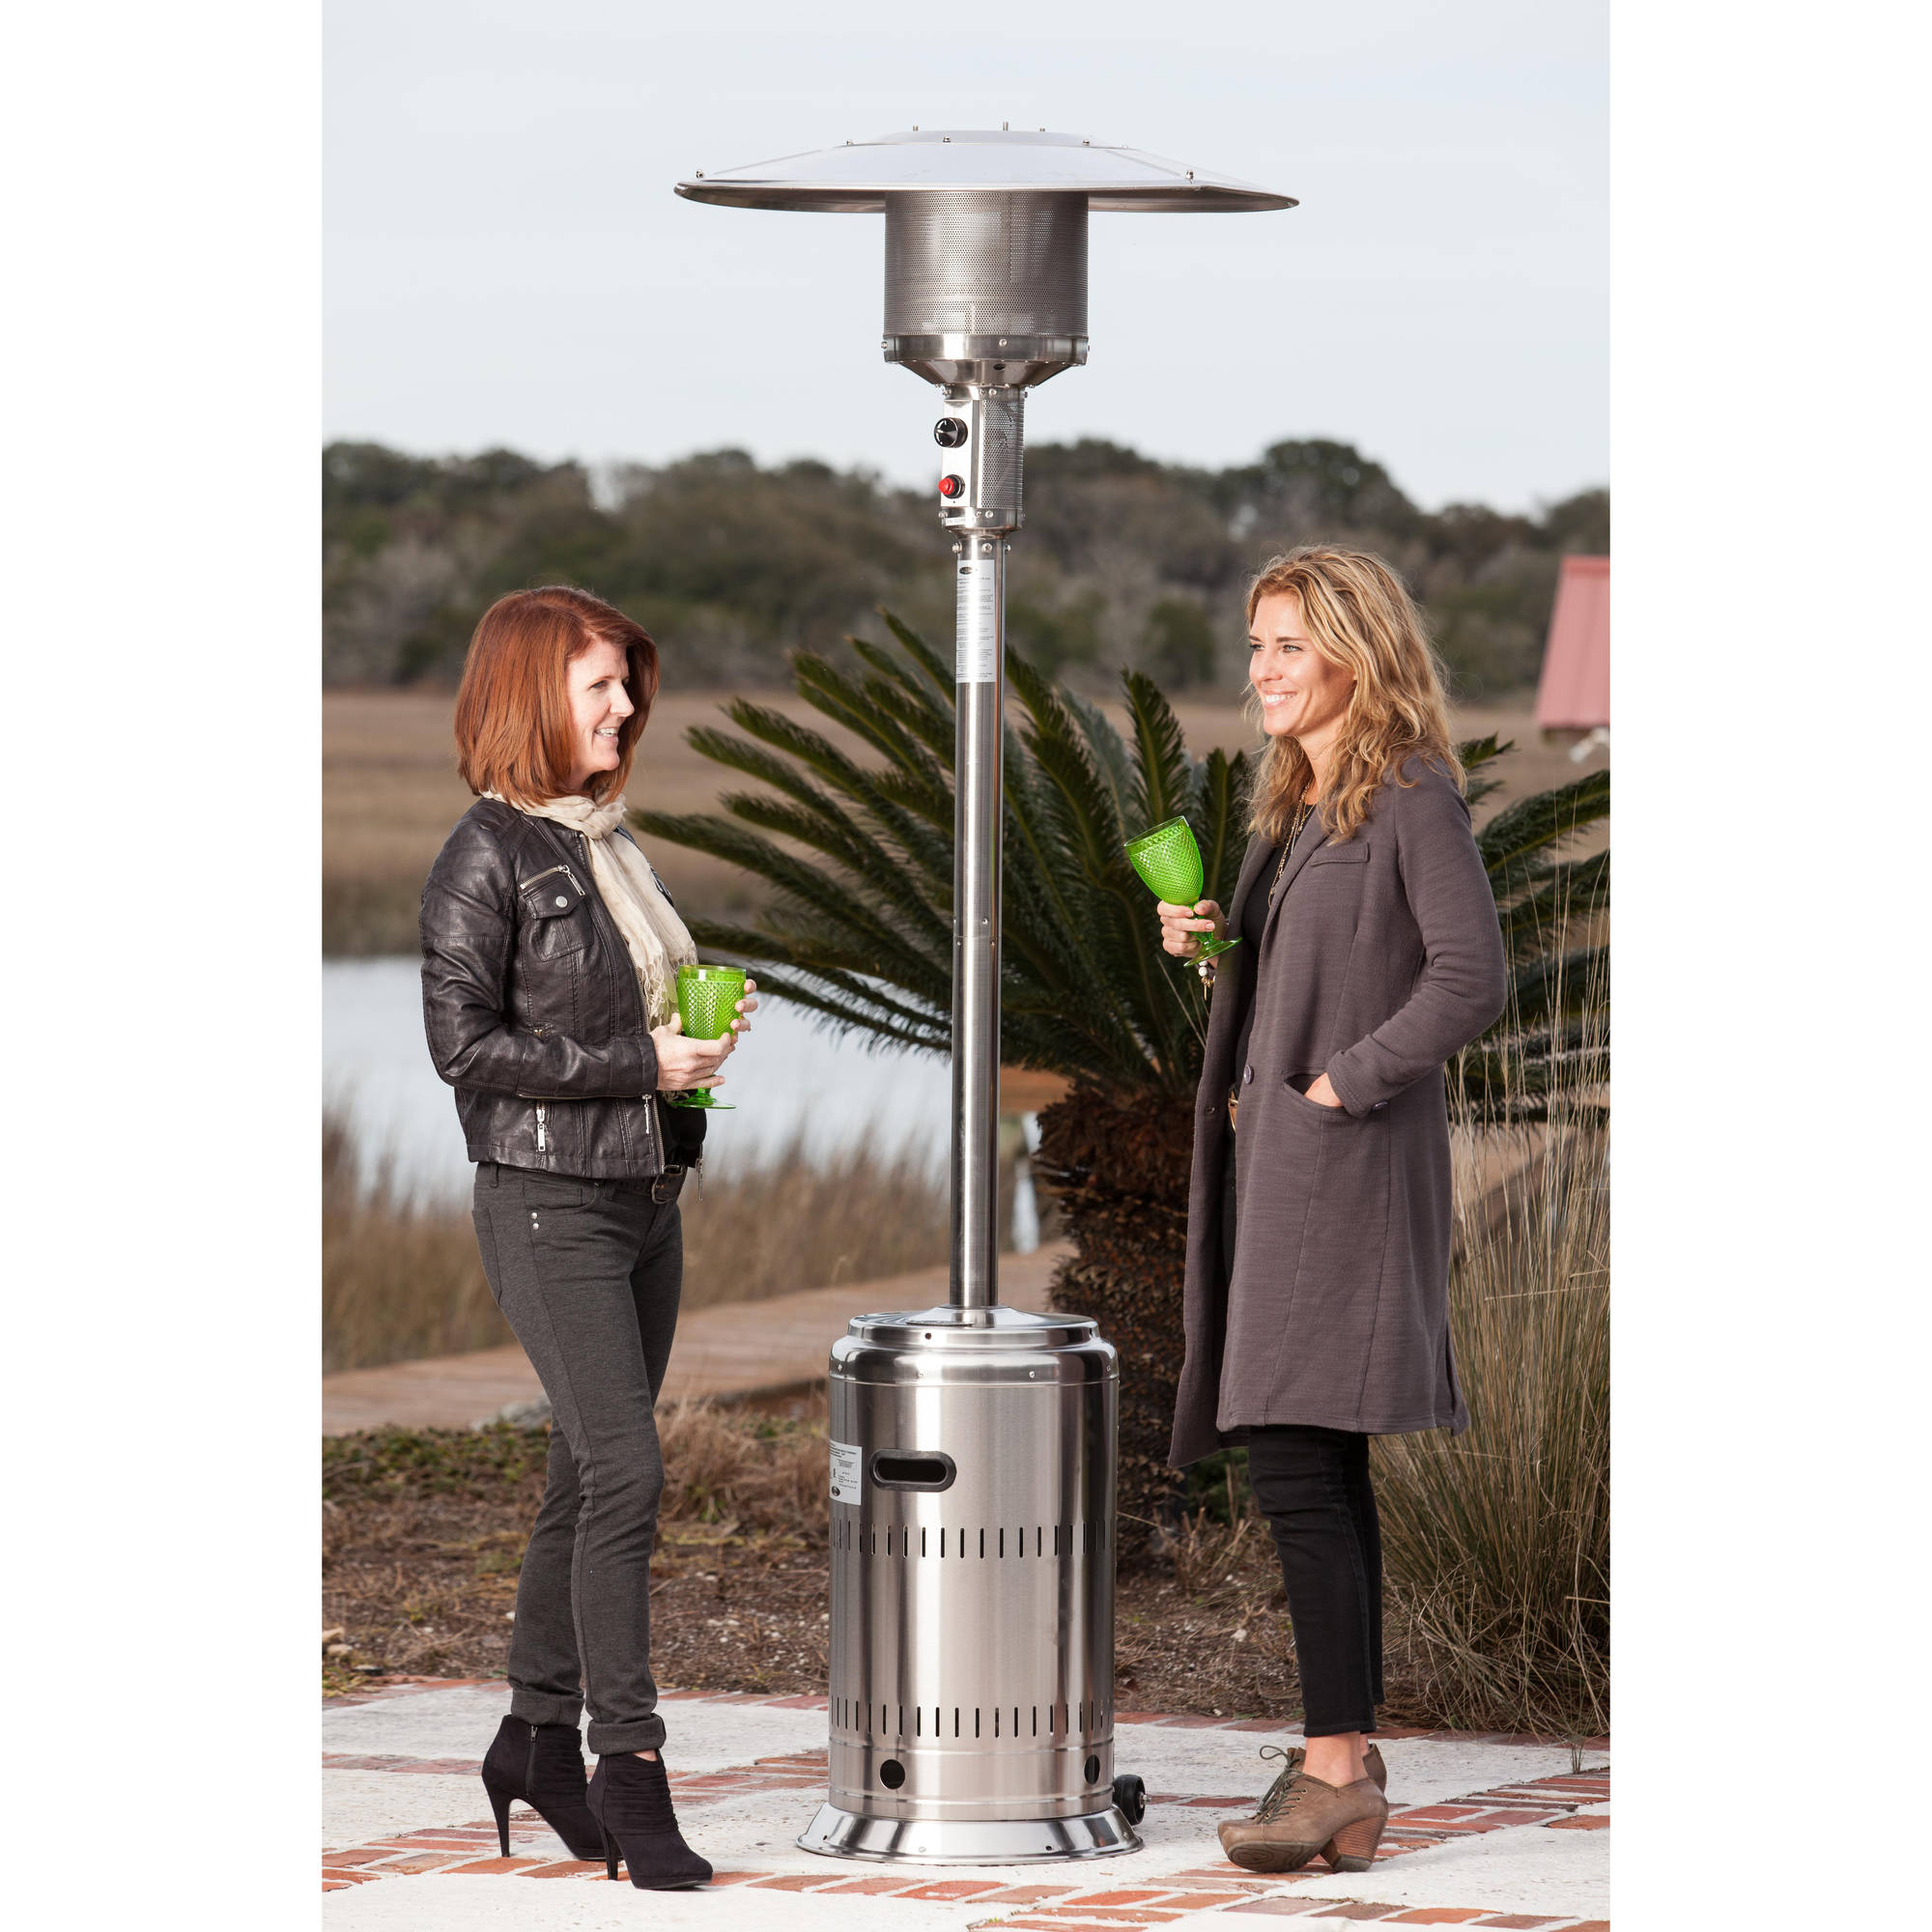 Fire Sense Stainless Steel Commercial Patio Heater - image 3 of 8